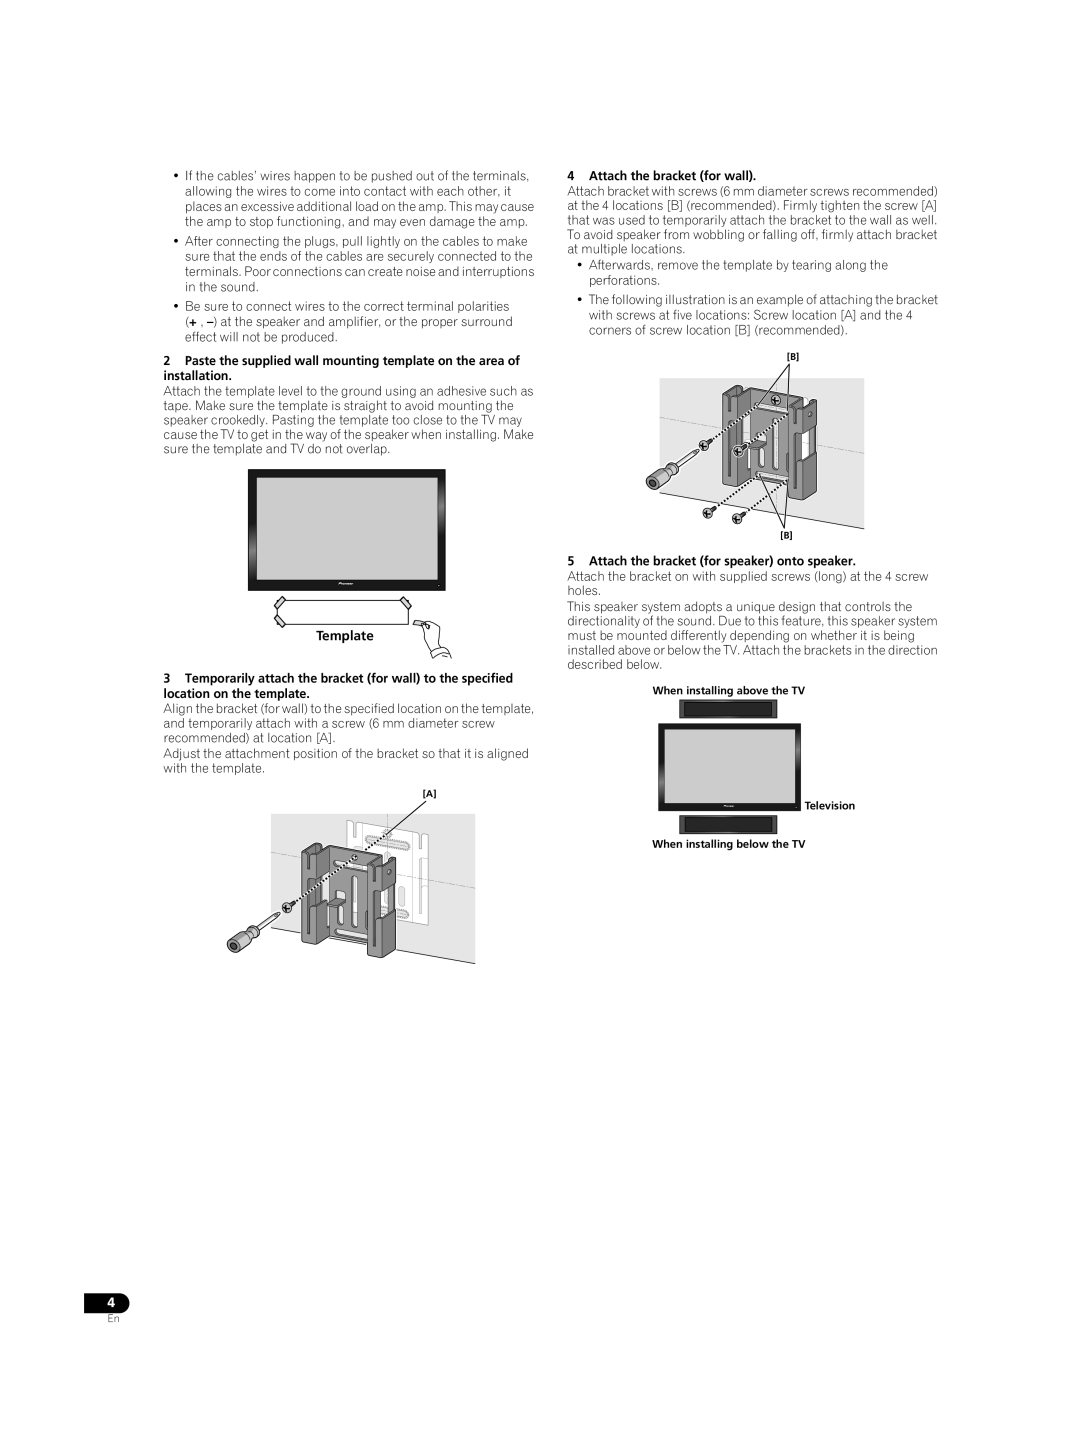 Pioneer S-LX70C operating instructions Template, Attach the bracket for wall, Attach the bracket for speaker onto speaker 